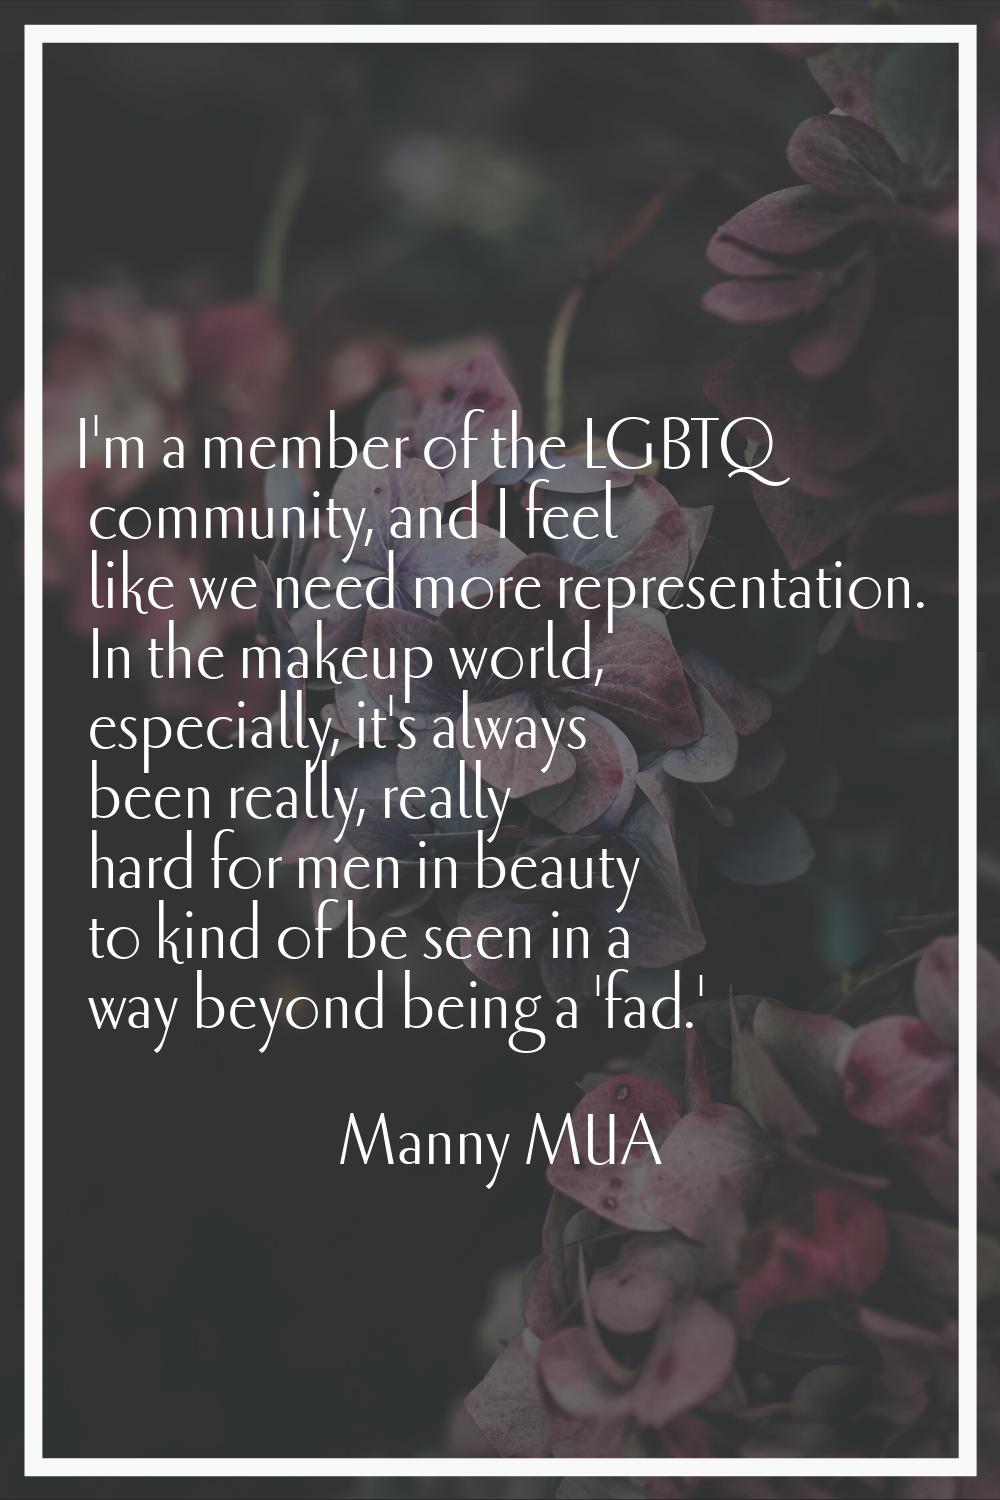 I'm a member of the LGBTQ community, and I feel like we need more representation. In the makeup wor